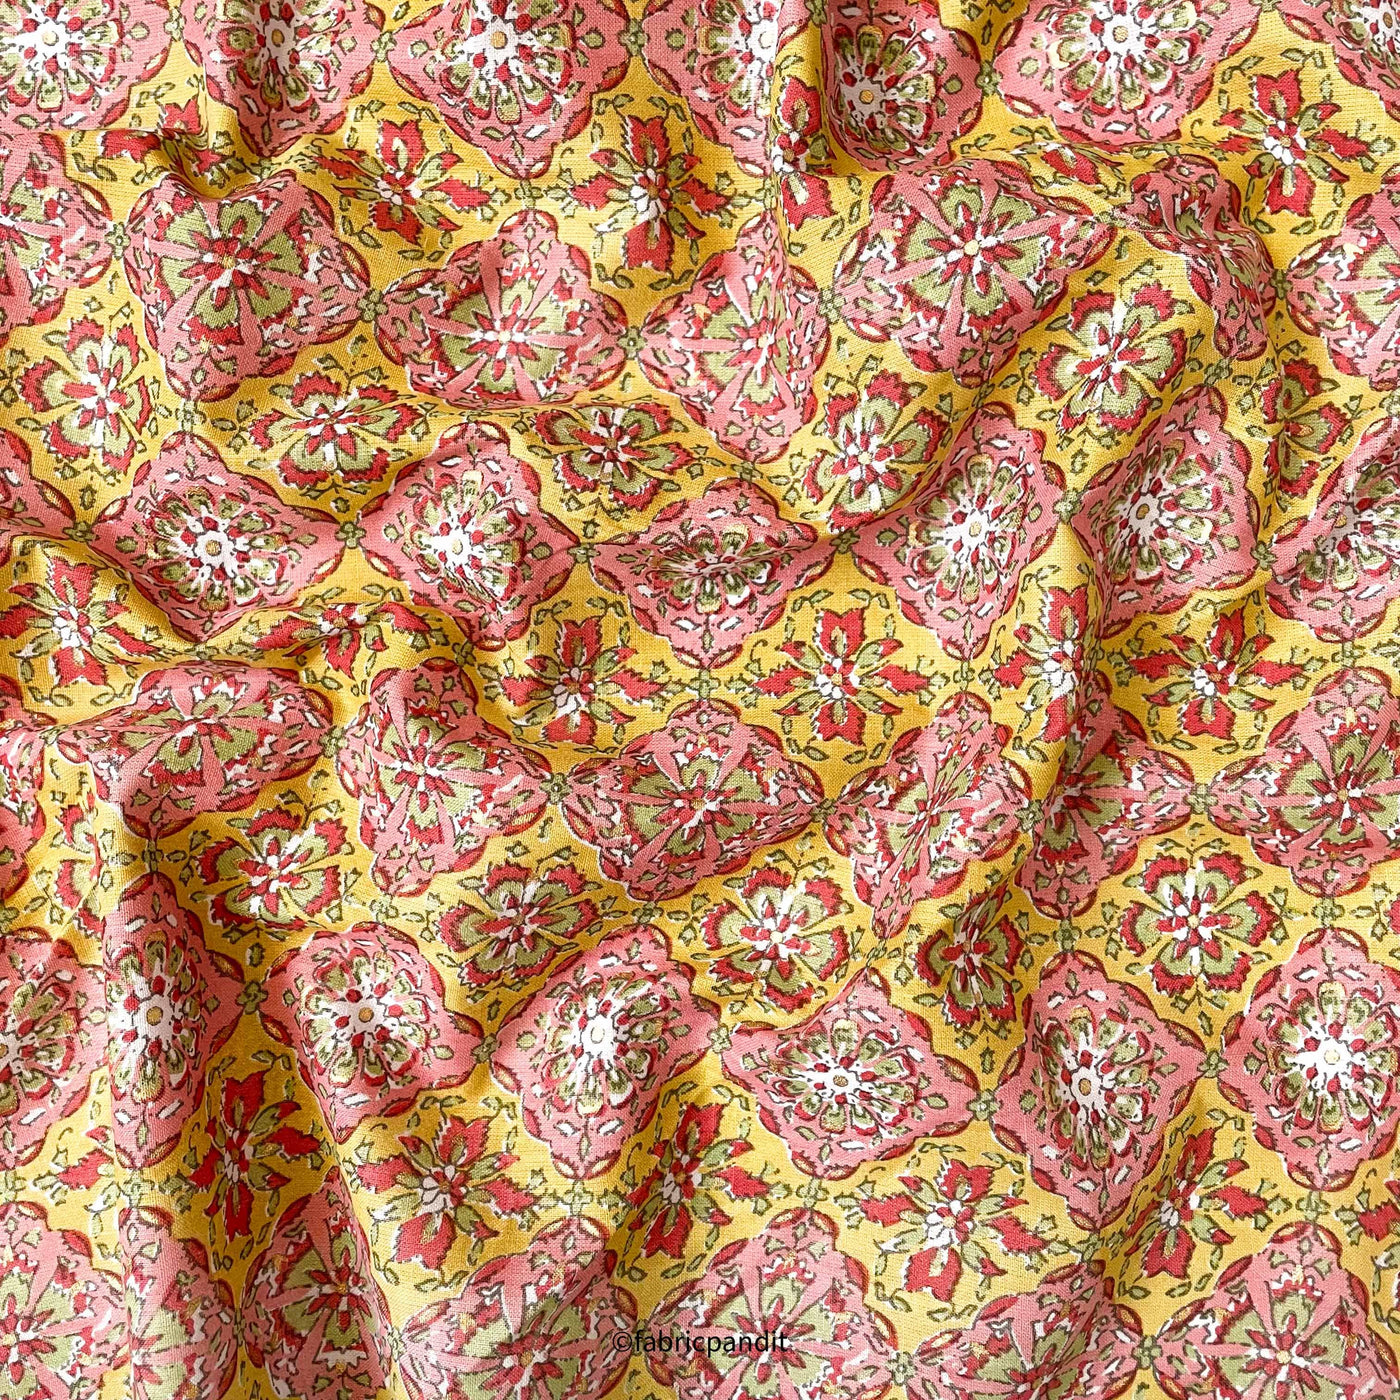 Fabric Pandit Fabric Mustard Yellow & Rose Pink Geometric Floral Hand Block Printed With Foil Pure Cotton Fabric (Width 42 inches)